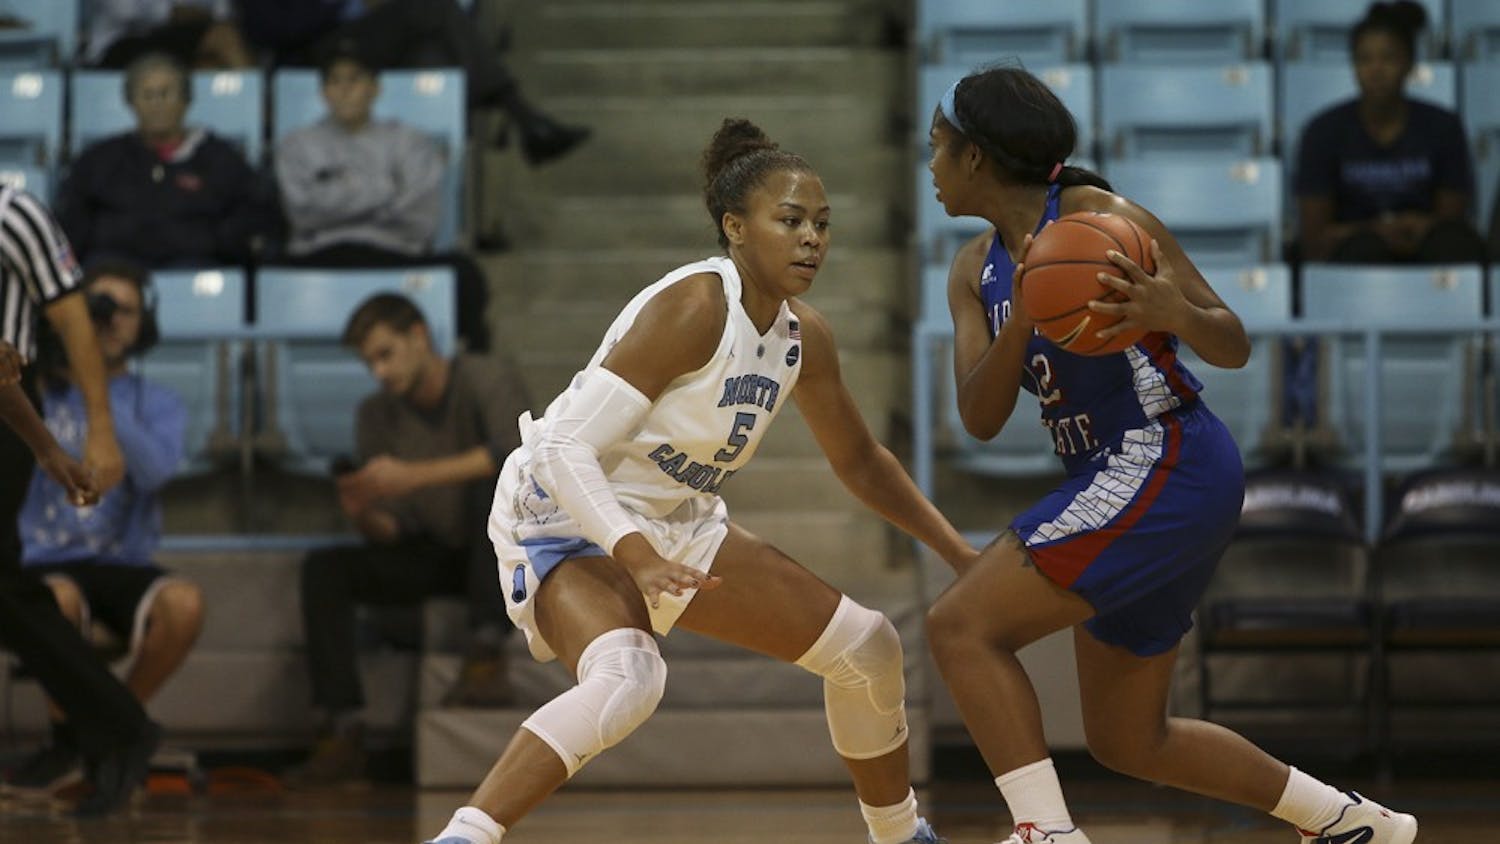 Sophomore guard Stephanie Watts (5) defends during the game against Elizabeth City State at Carmichael Arena on Monday.